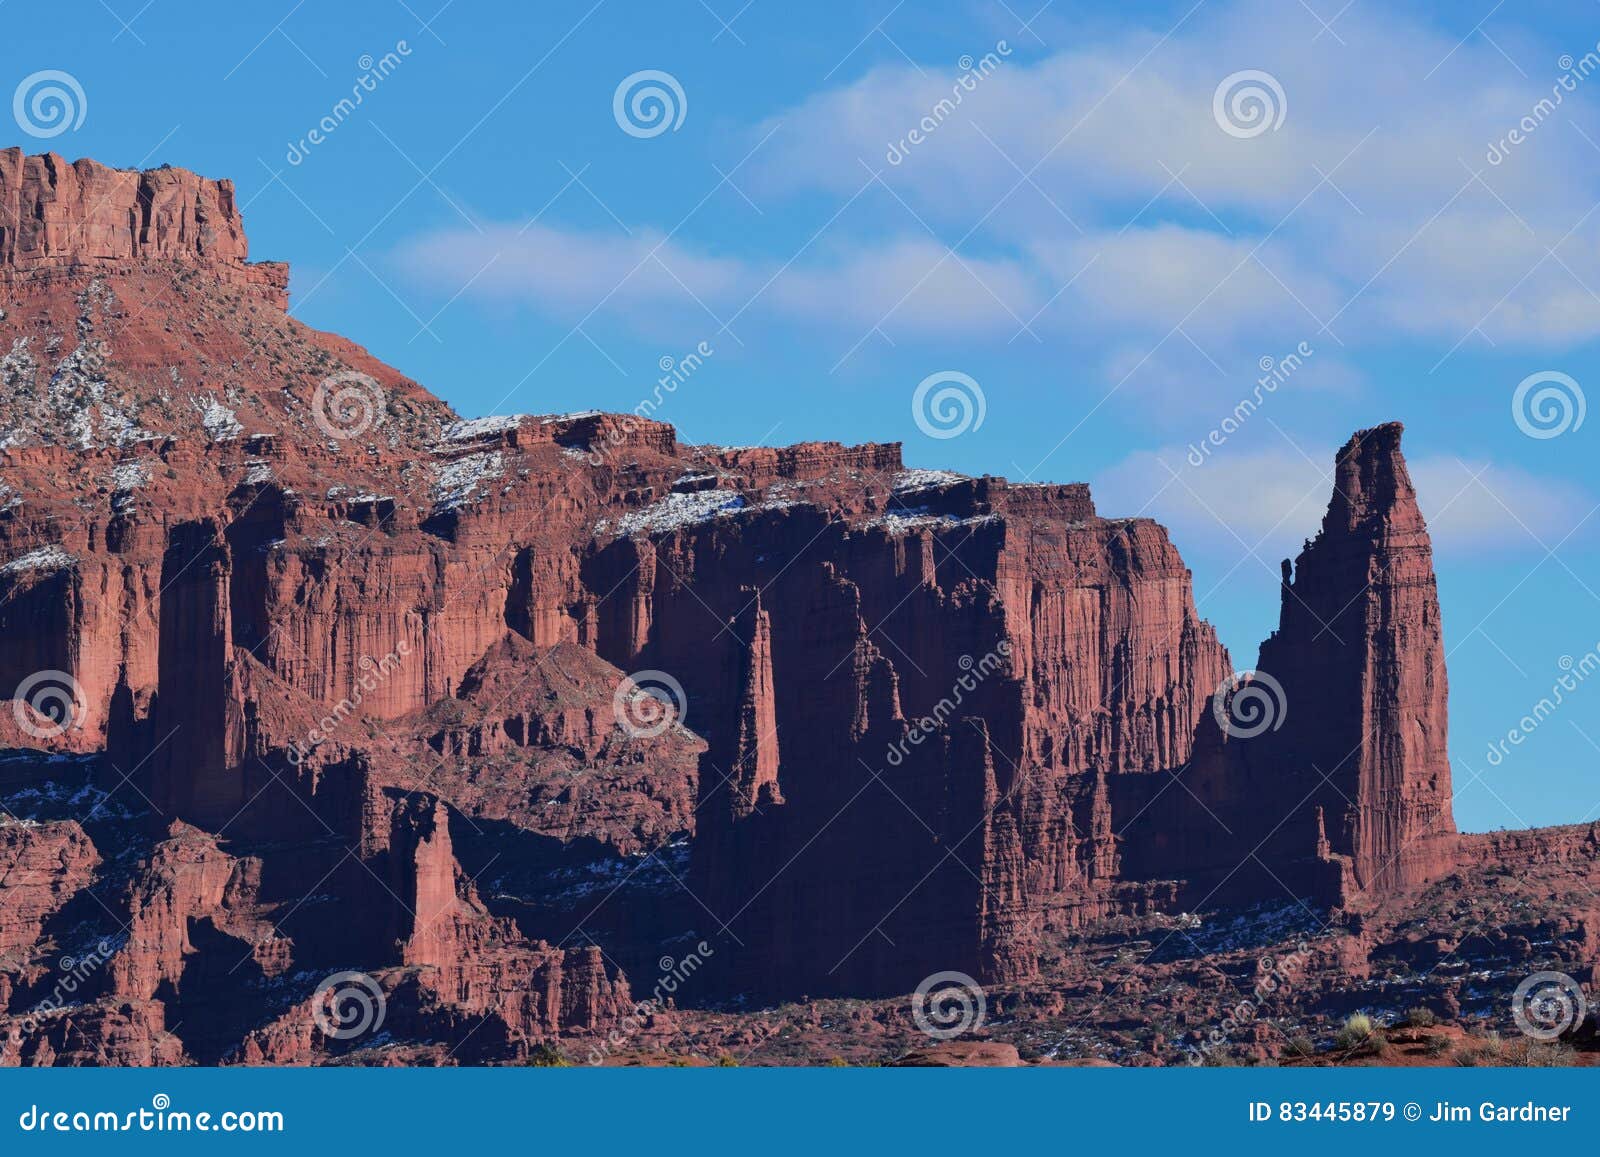 fisher towers - contrasts in color